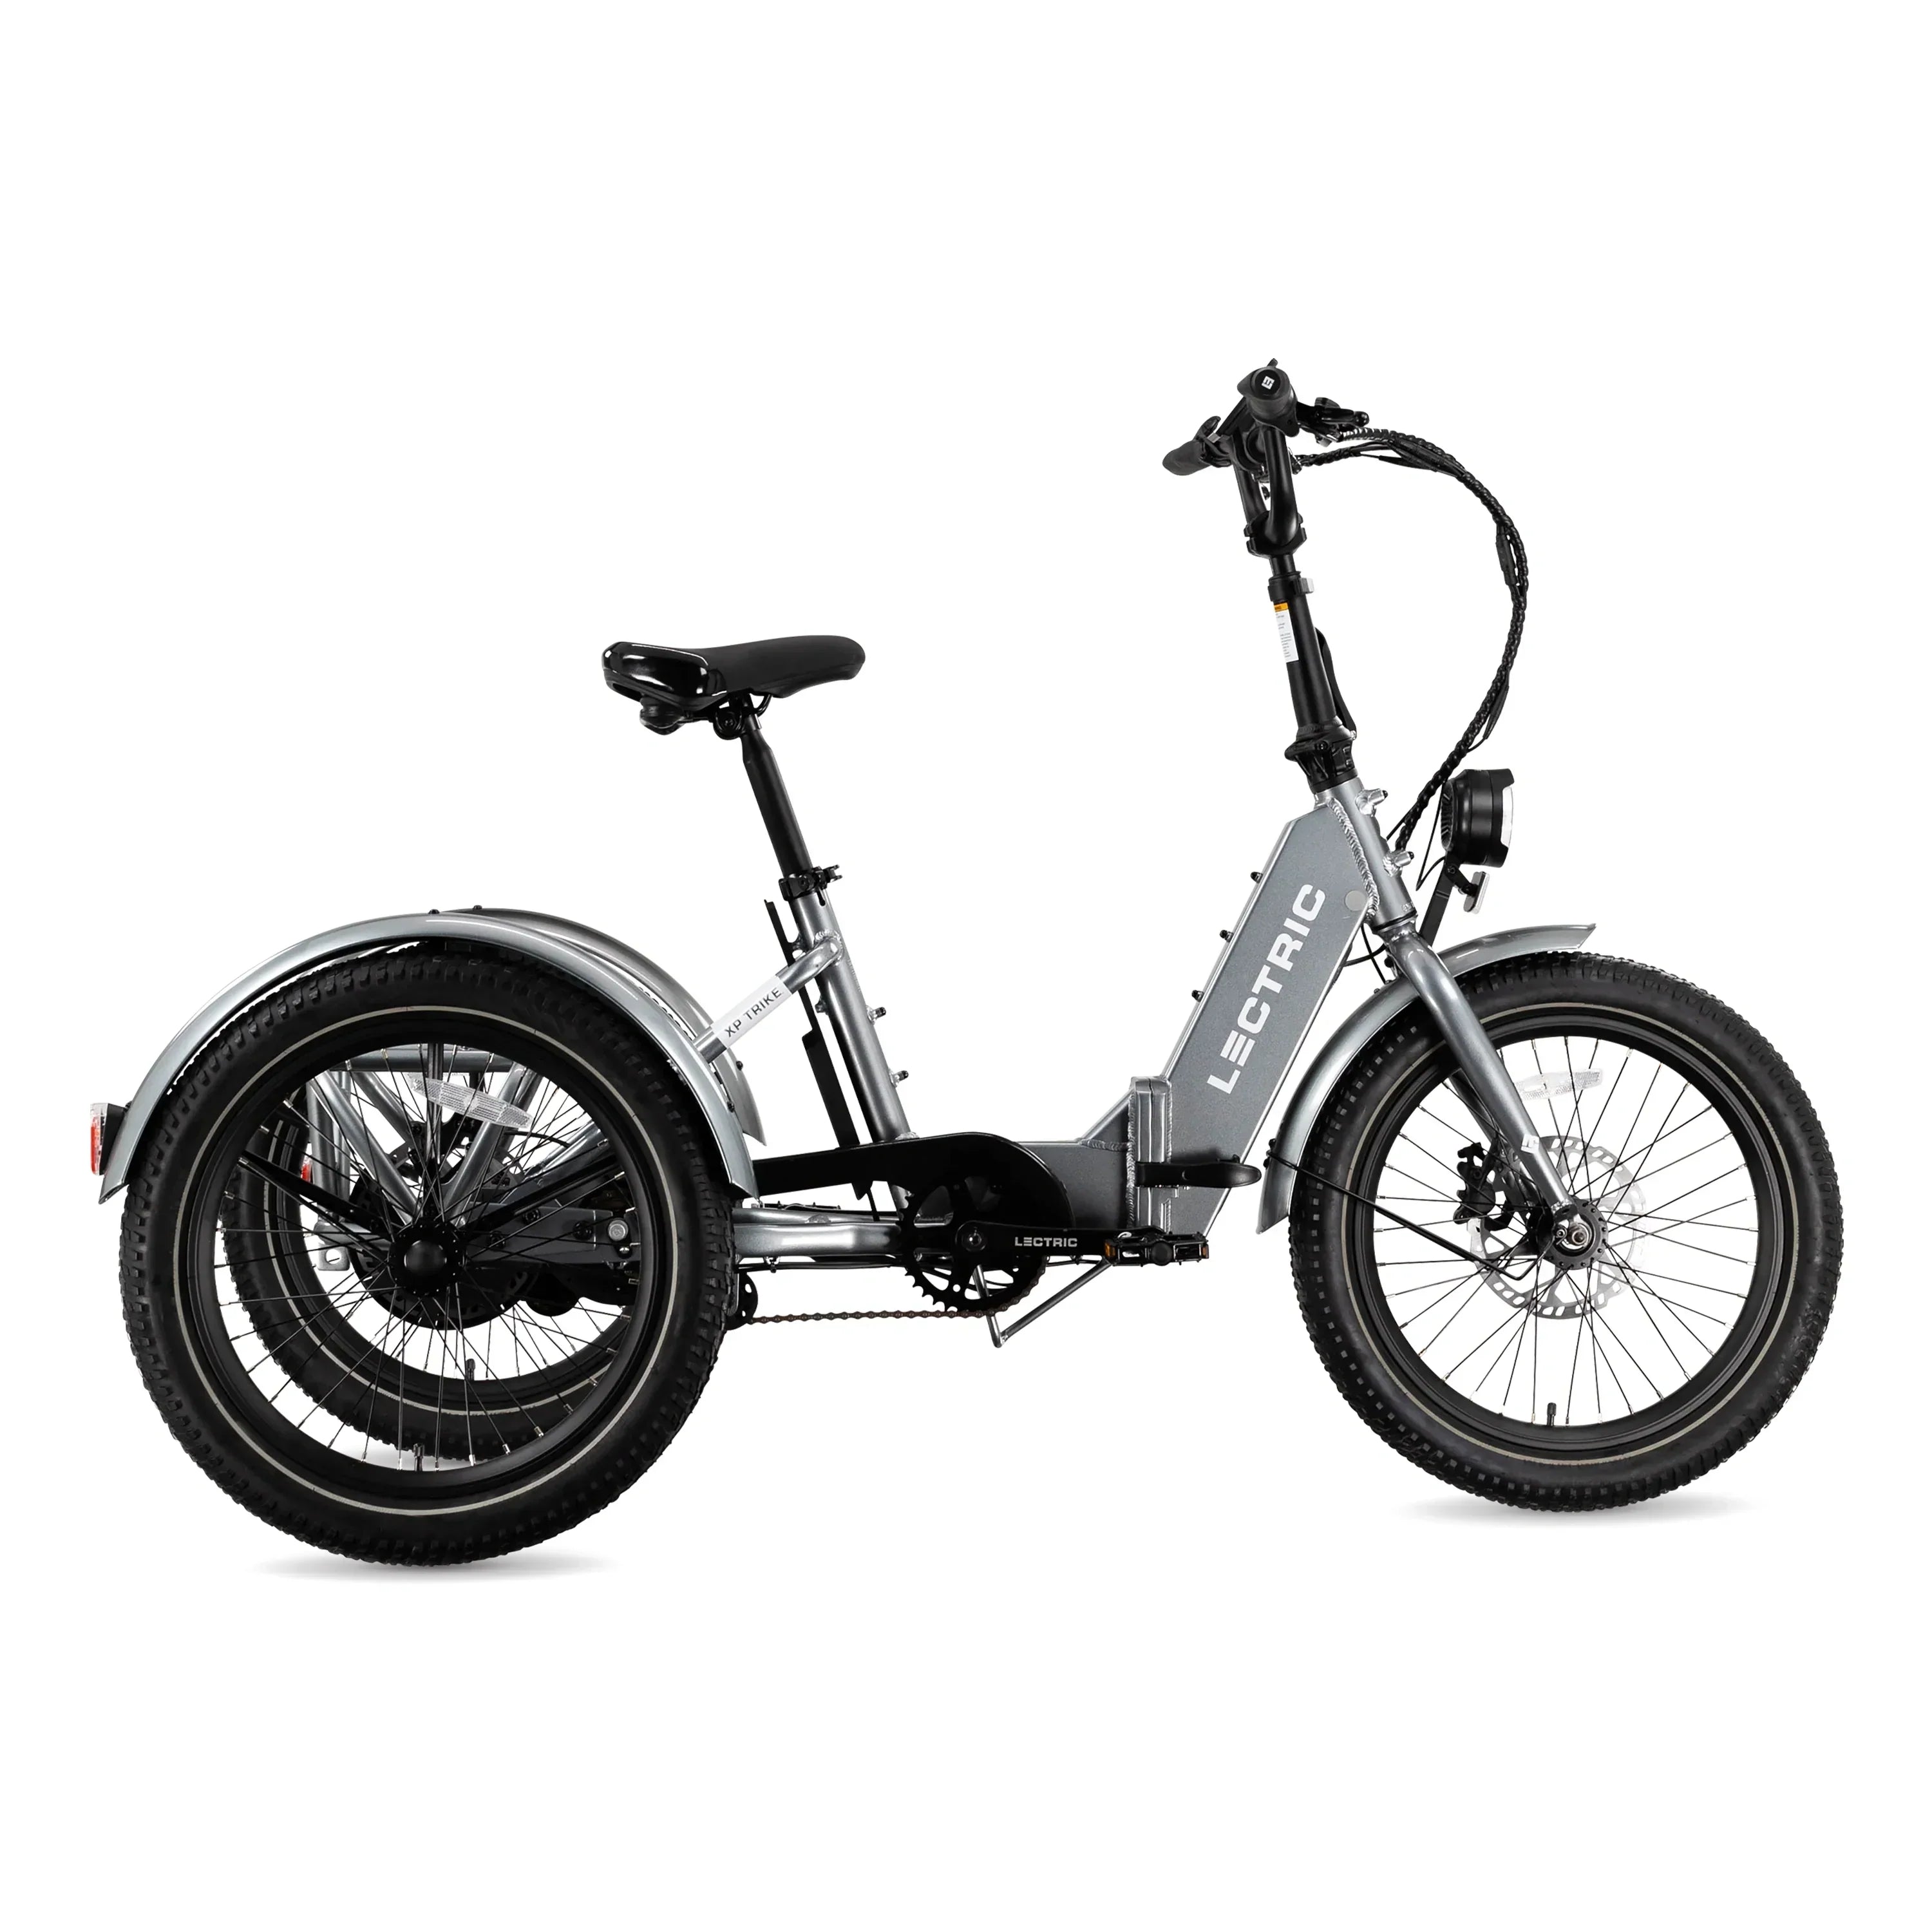 Lectric XP Trike | Adult Folding 3 Wheel Electric Tricycle | Best Affordable Fully Assembled Lightweight Class 2 Motorized eTrike | Great for Seniors